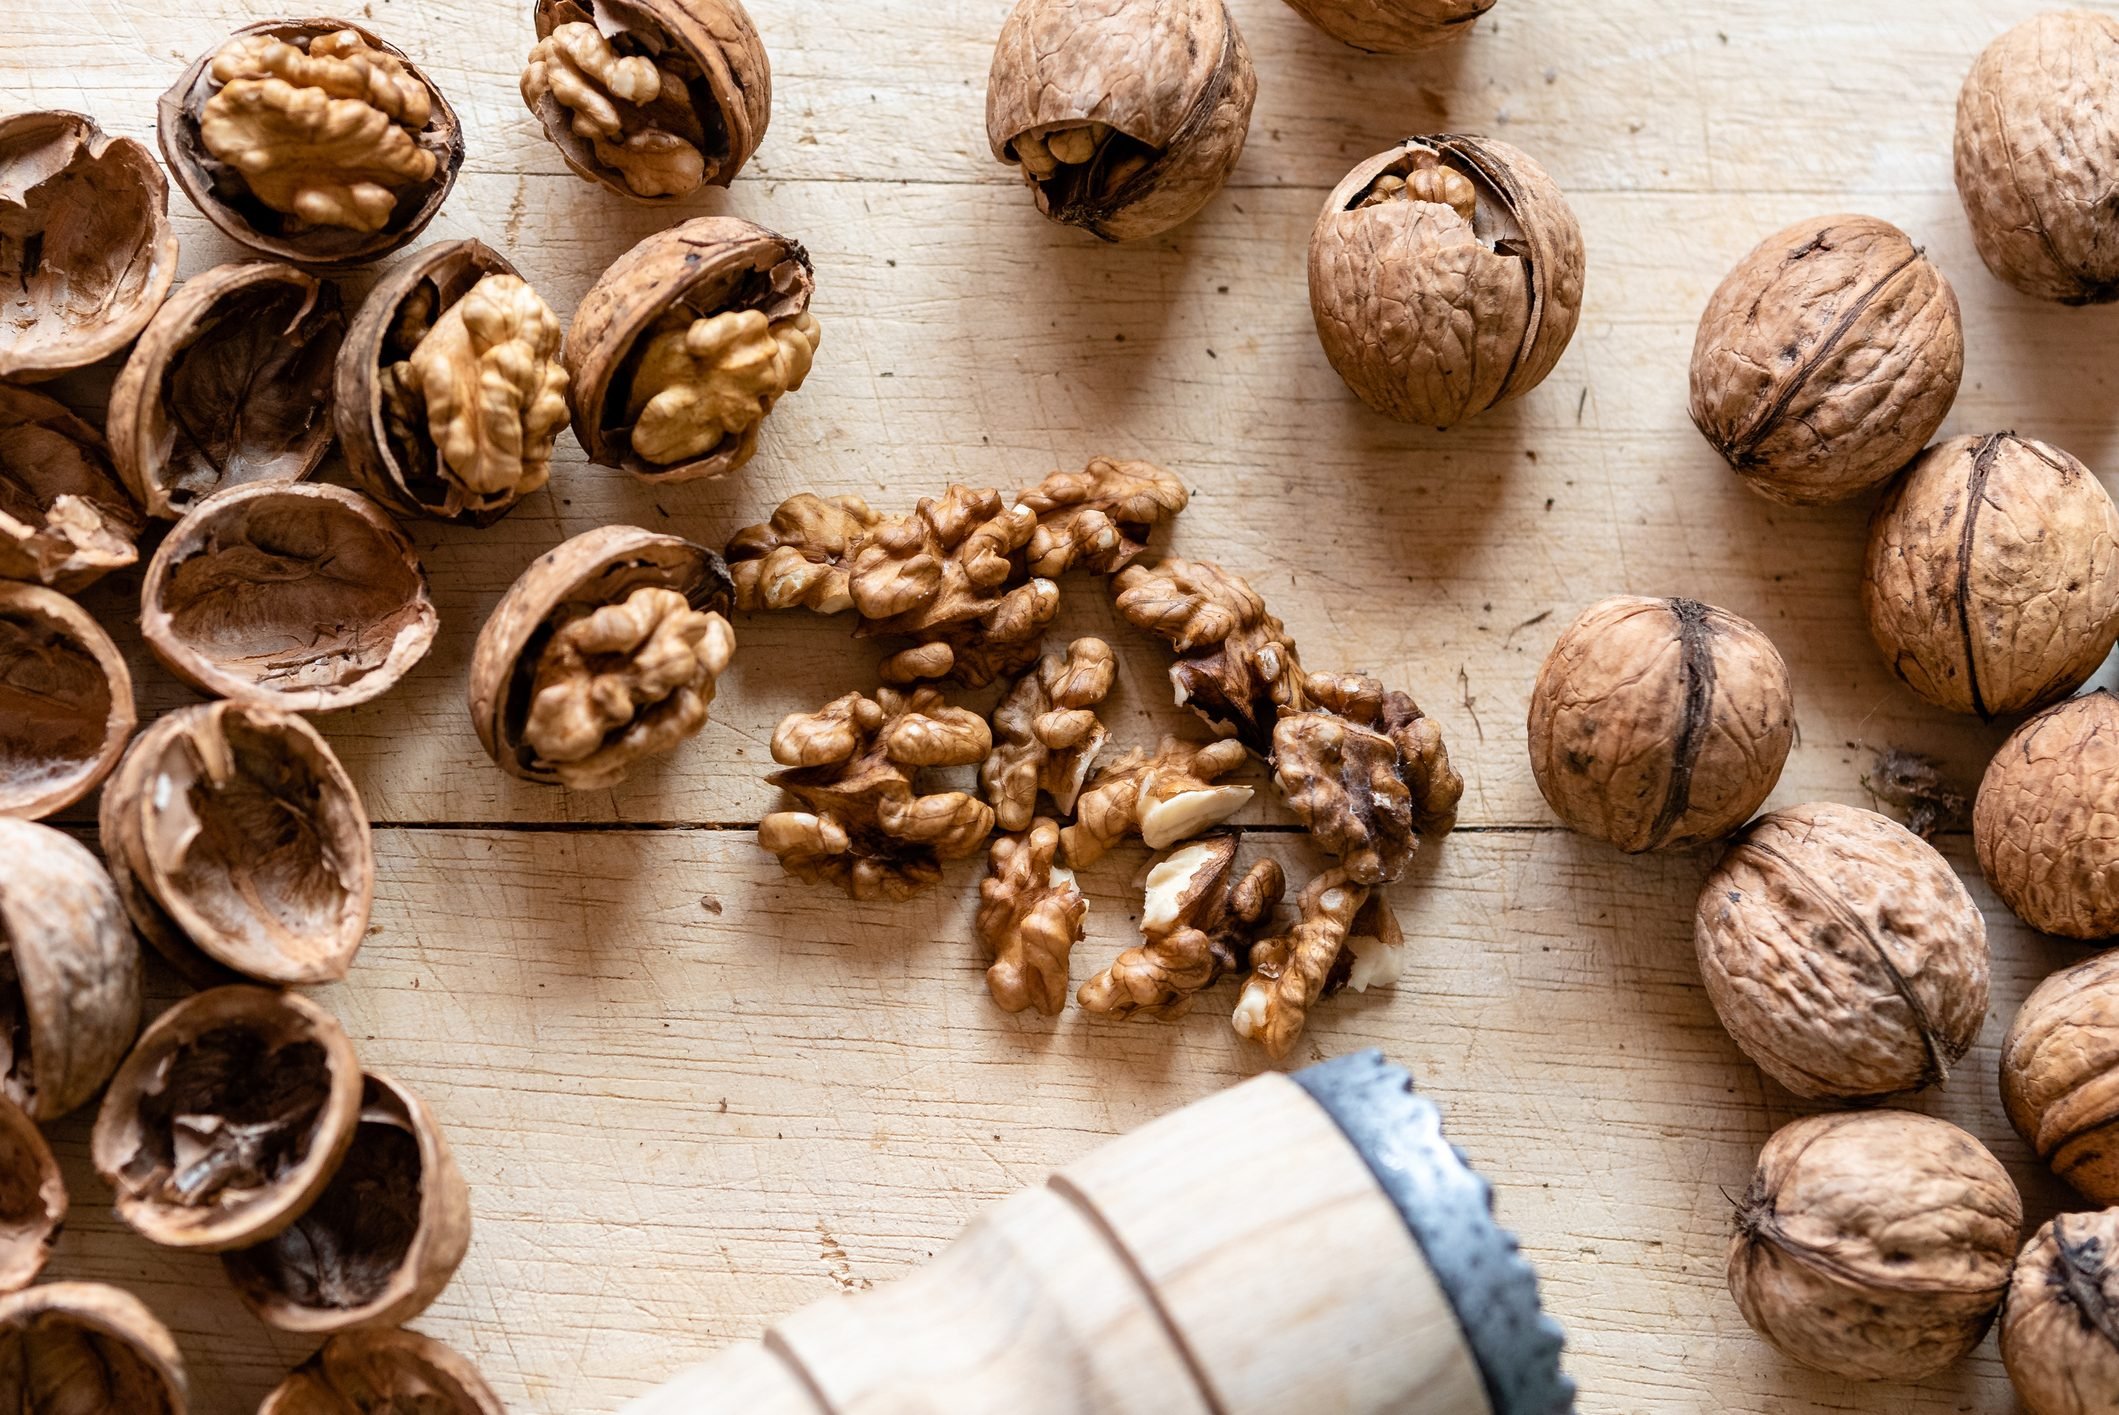 Are Walnuts Good for You? Their Calories, Nutrition, and Benefits